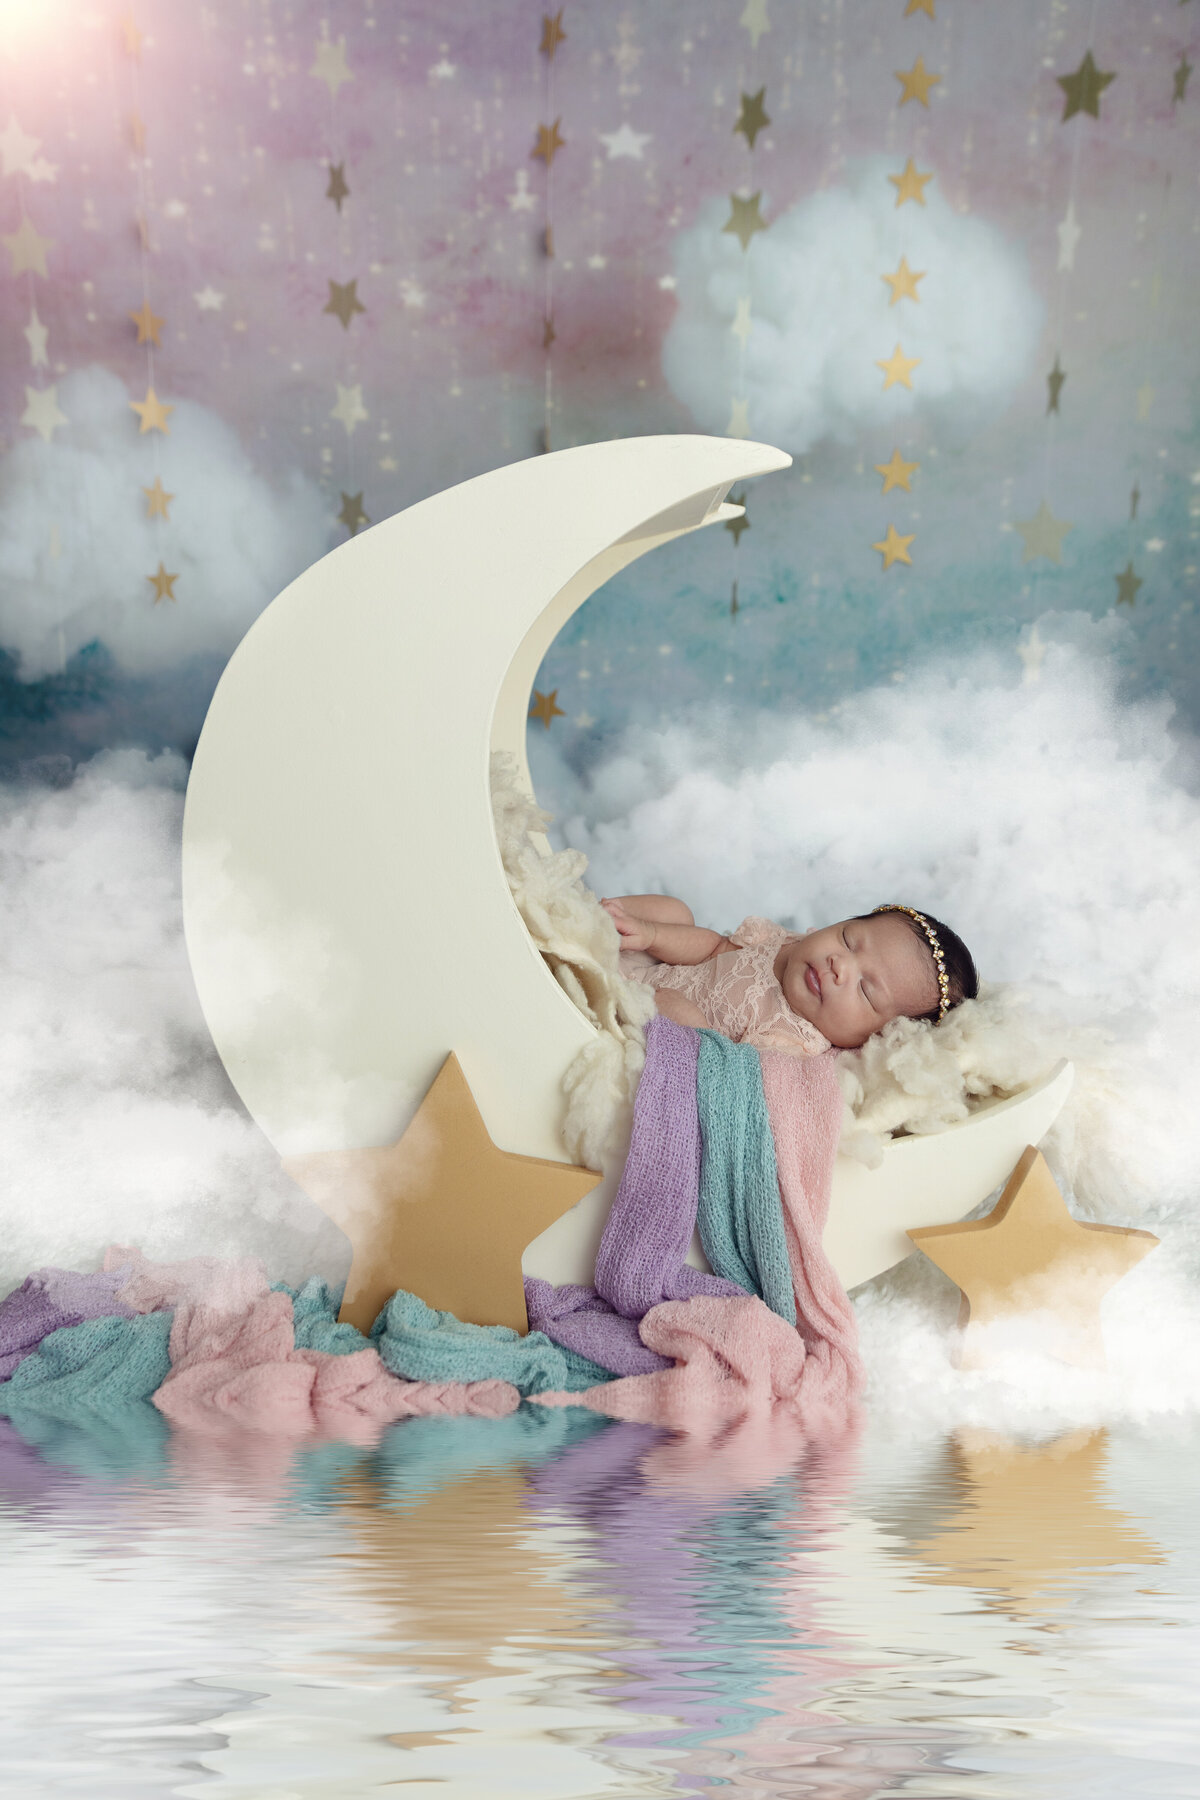 A newborn baby sleeps in a moon shaped crib with colorful blankets flowing out of it